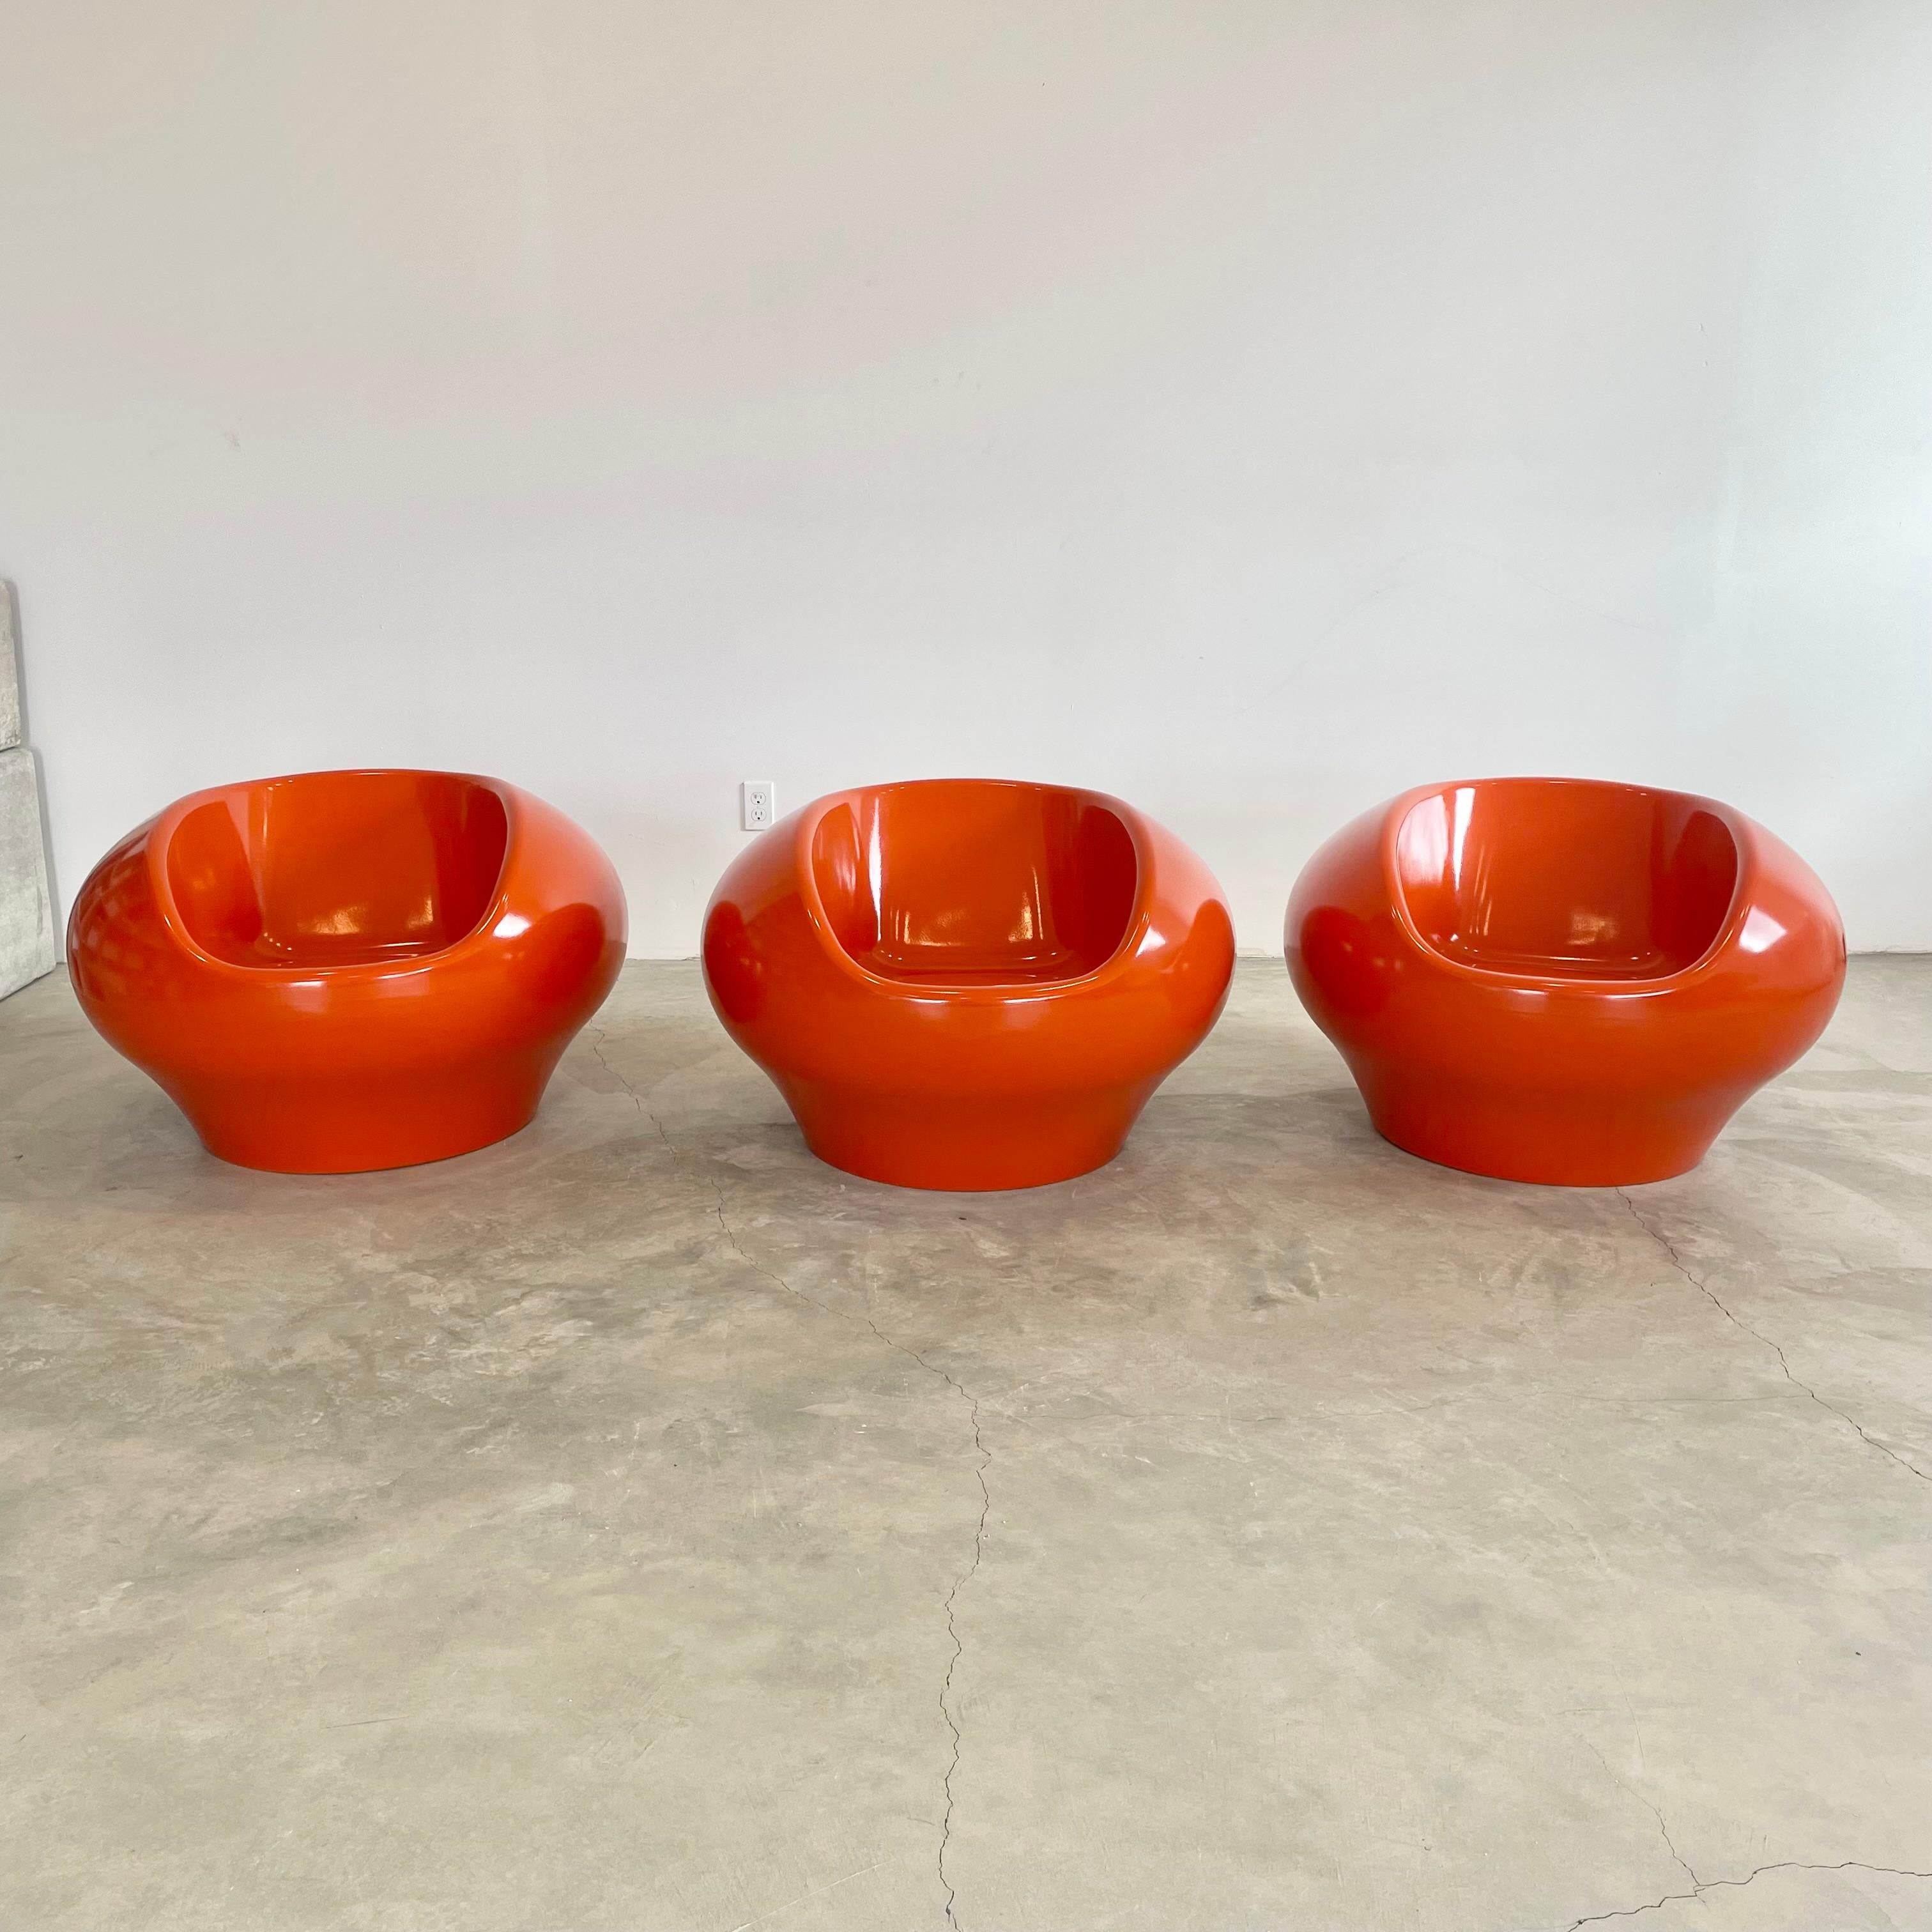 Beautiful set of 3 fiberglass chairs in the style of Eero Aarnio's Pastil chair. Only set we have found to exist with a deep Google search. Handmade and finished in orange. The tapered bottom is a functional improvement to the classic Pastil chair